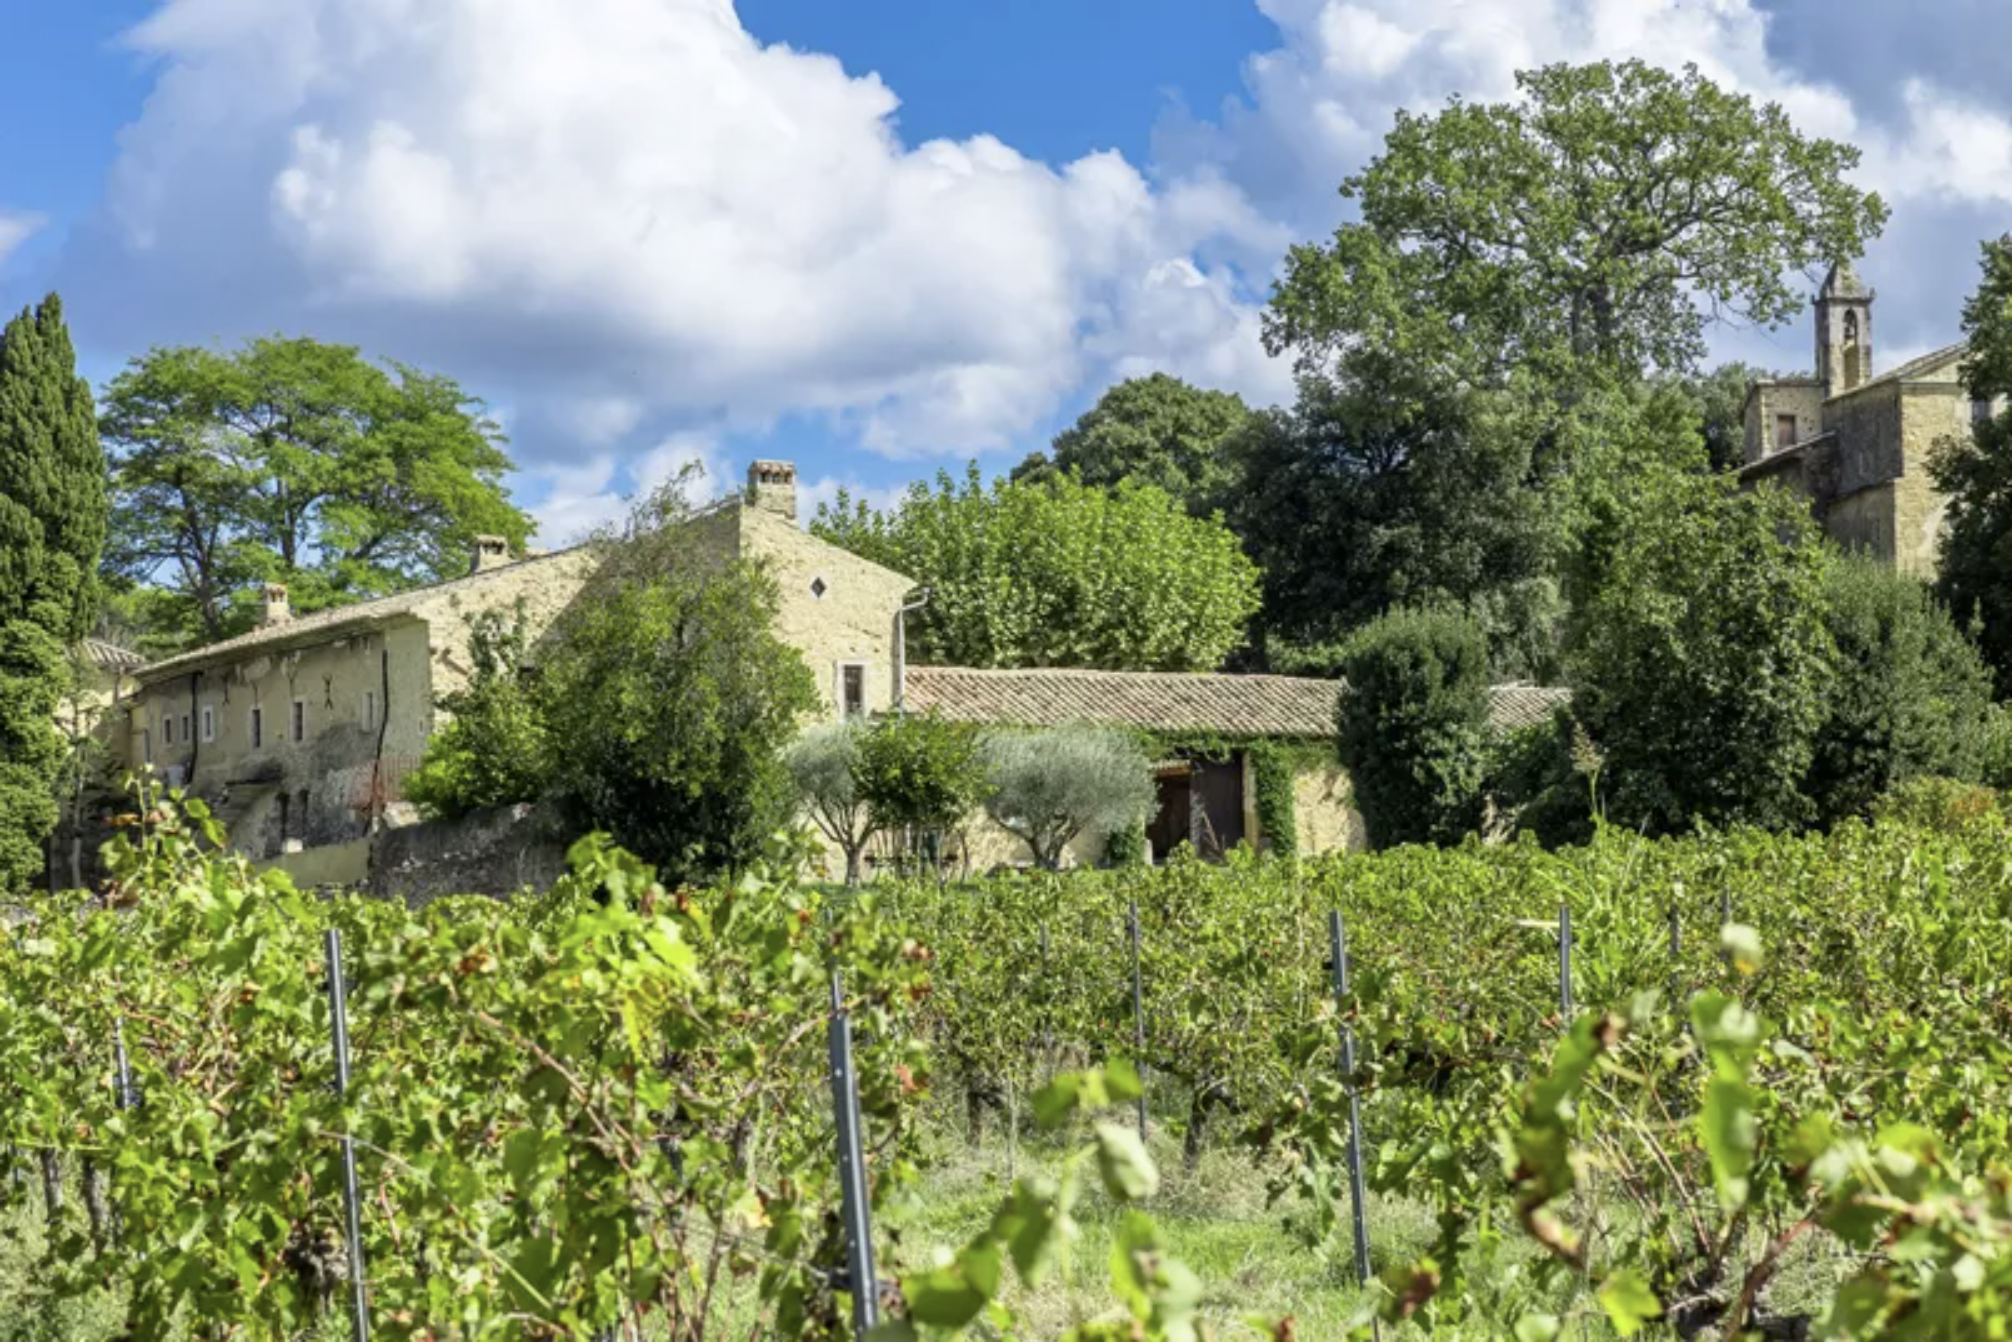 Francis+York+Renovated Historic Residence and 98 Acre Estate in Provence, France  00006.png